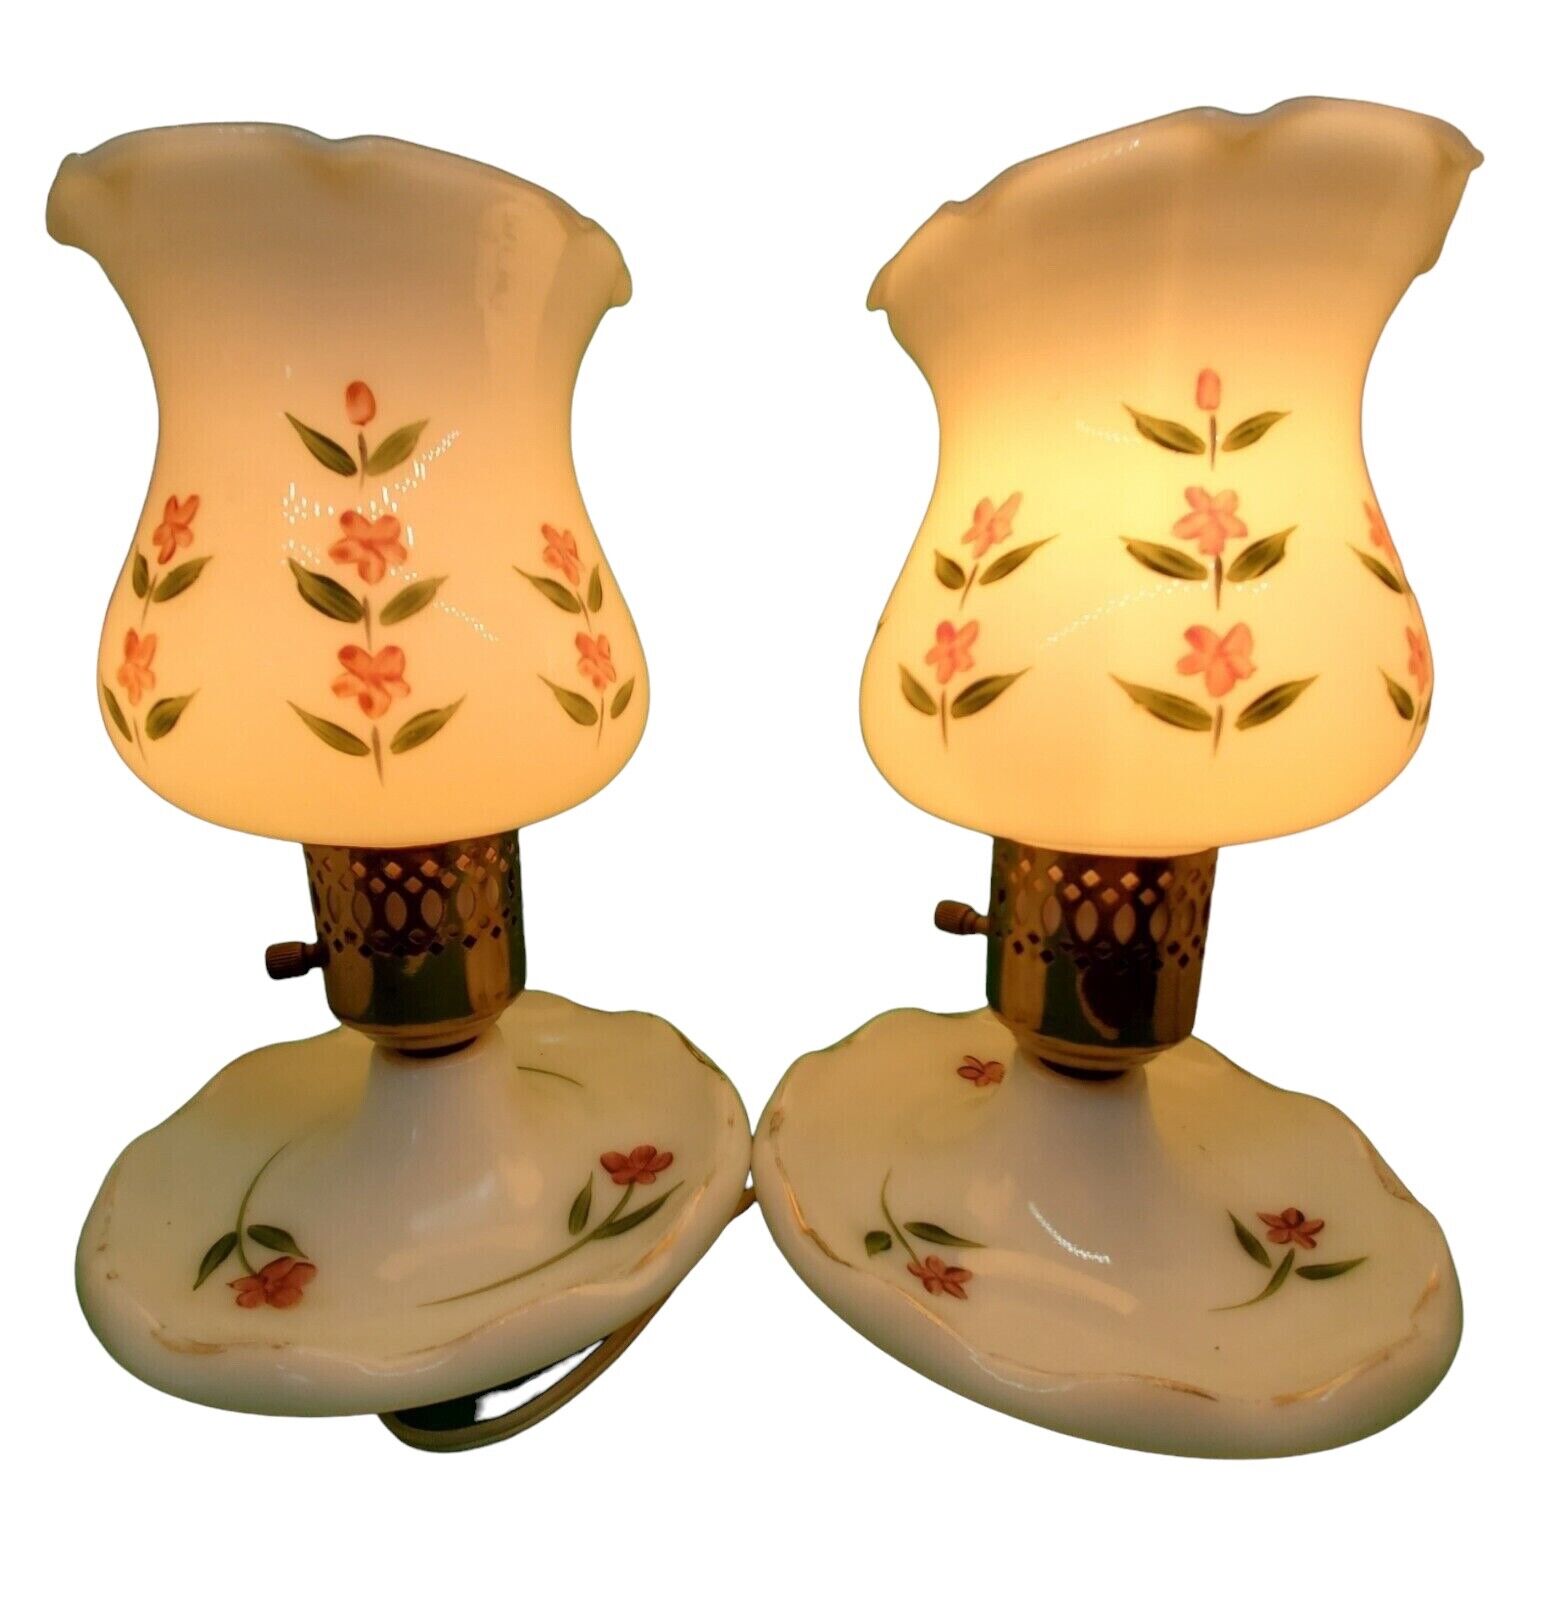 Pair of Vintage 1950's MILK GLASS HURRICANE LAMPS Hand Painted